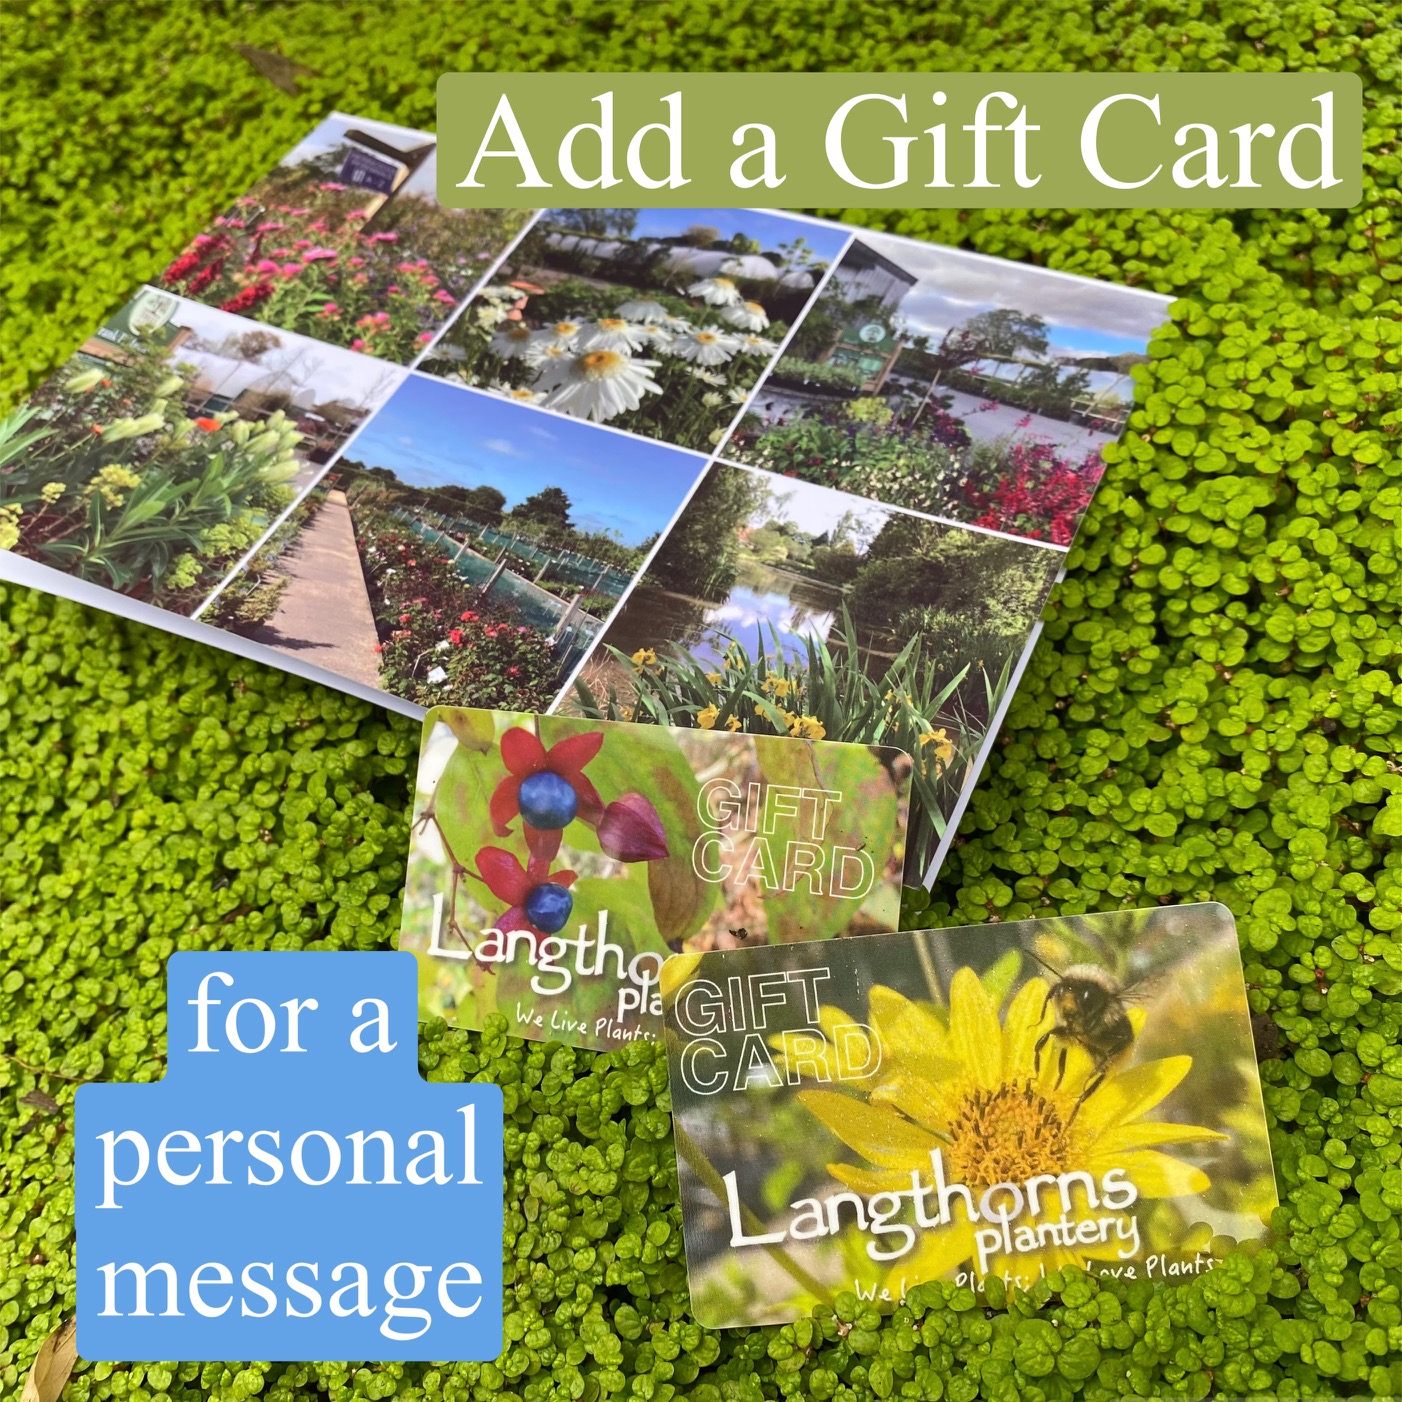 Langthorns All NEW Gift Cards